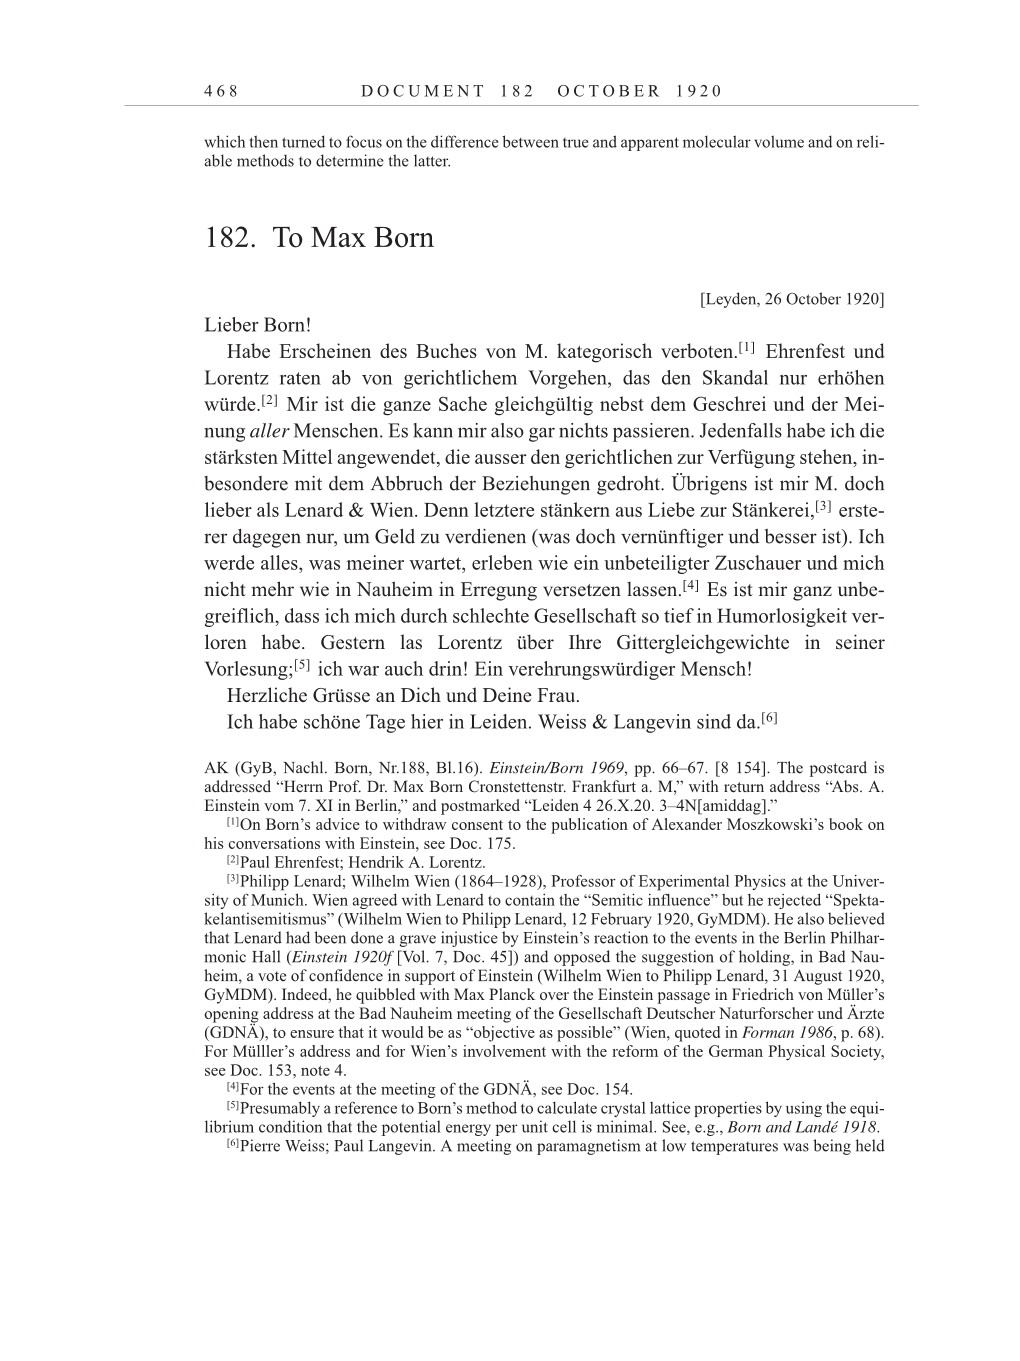 Volume 10: The Berlin Years: Correspondence May-December 1920 / Supplementary Correspondence 1909-1920 page 468